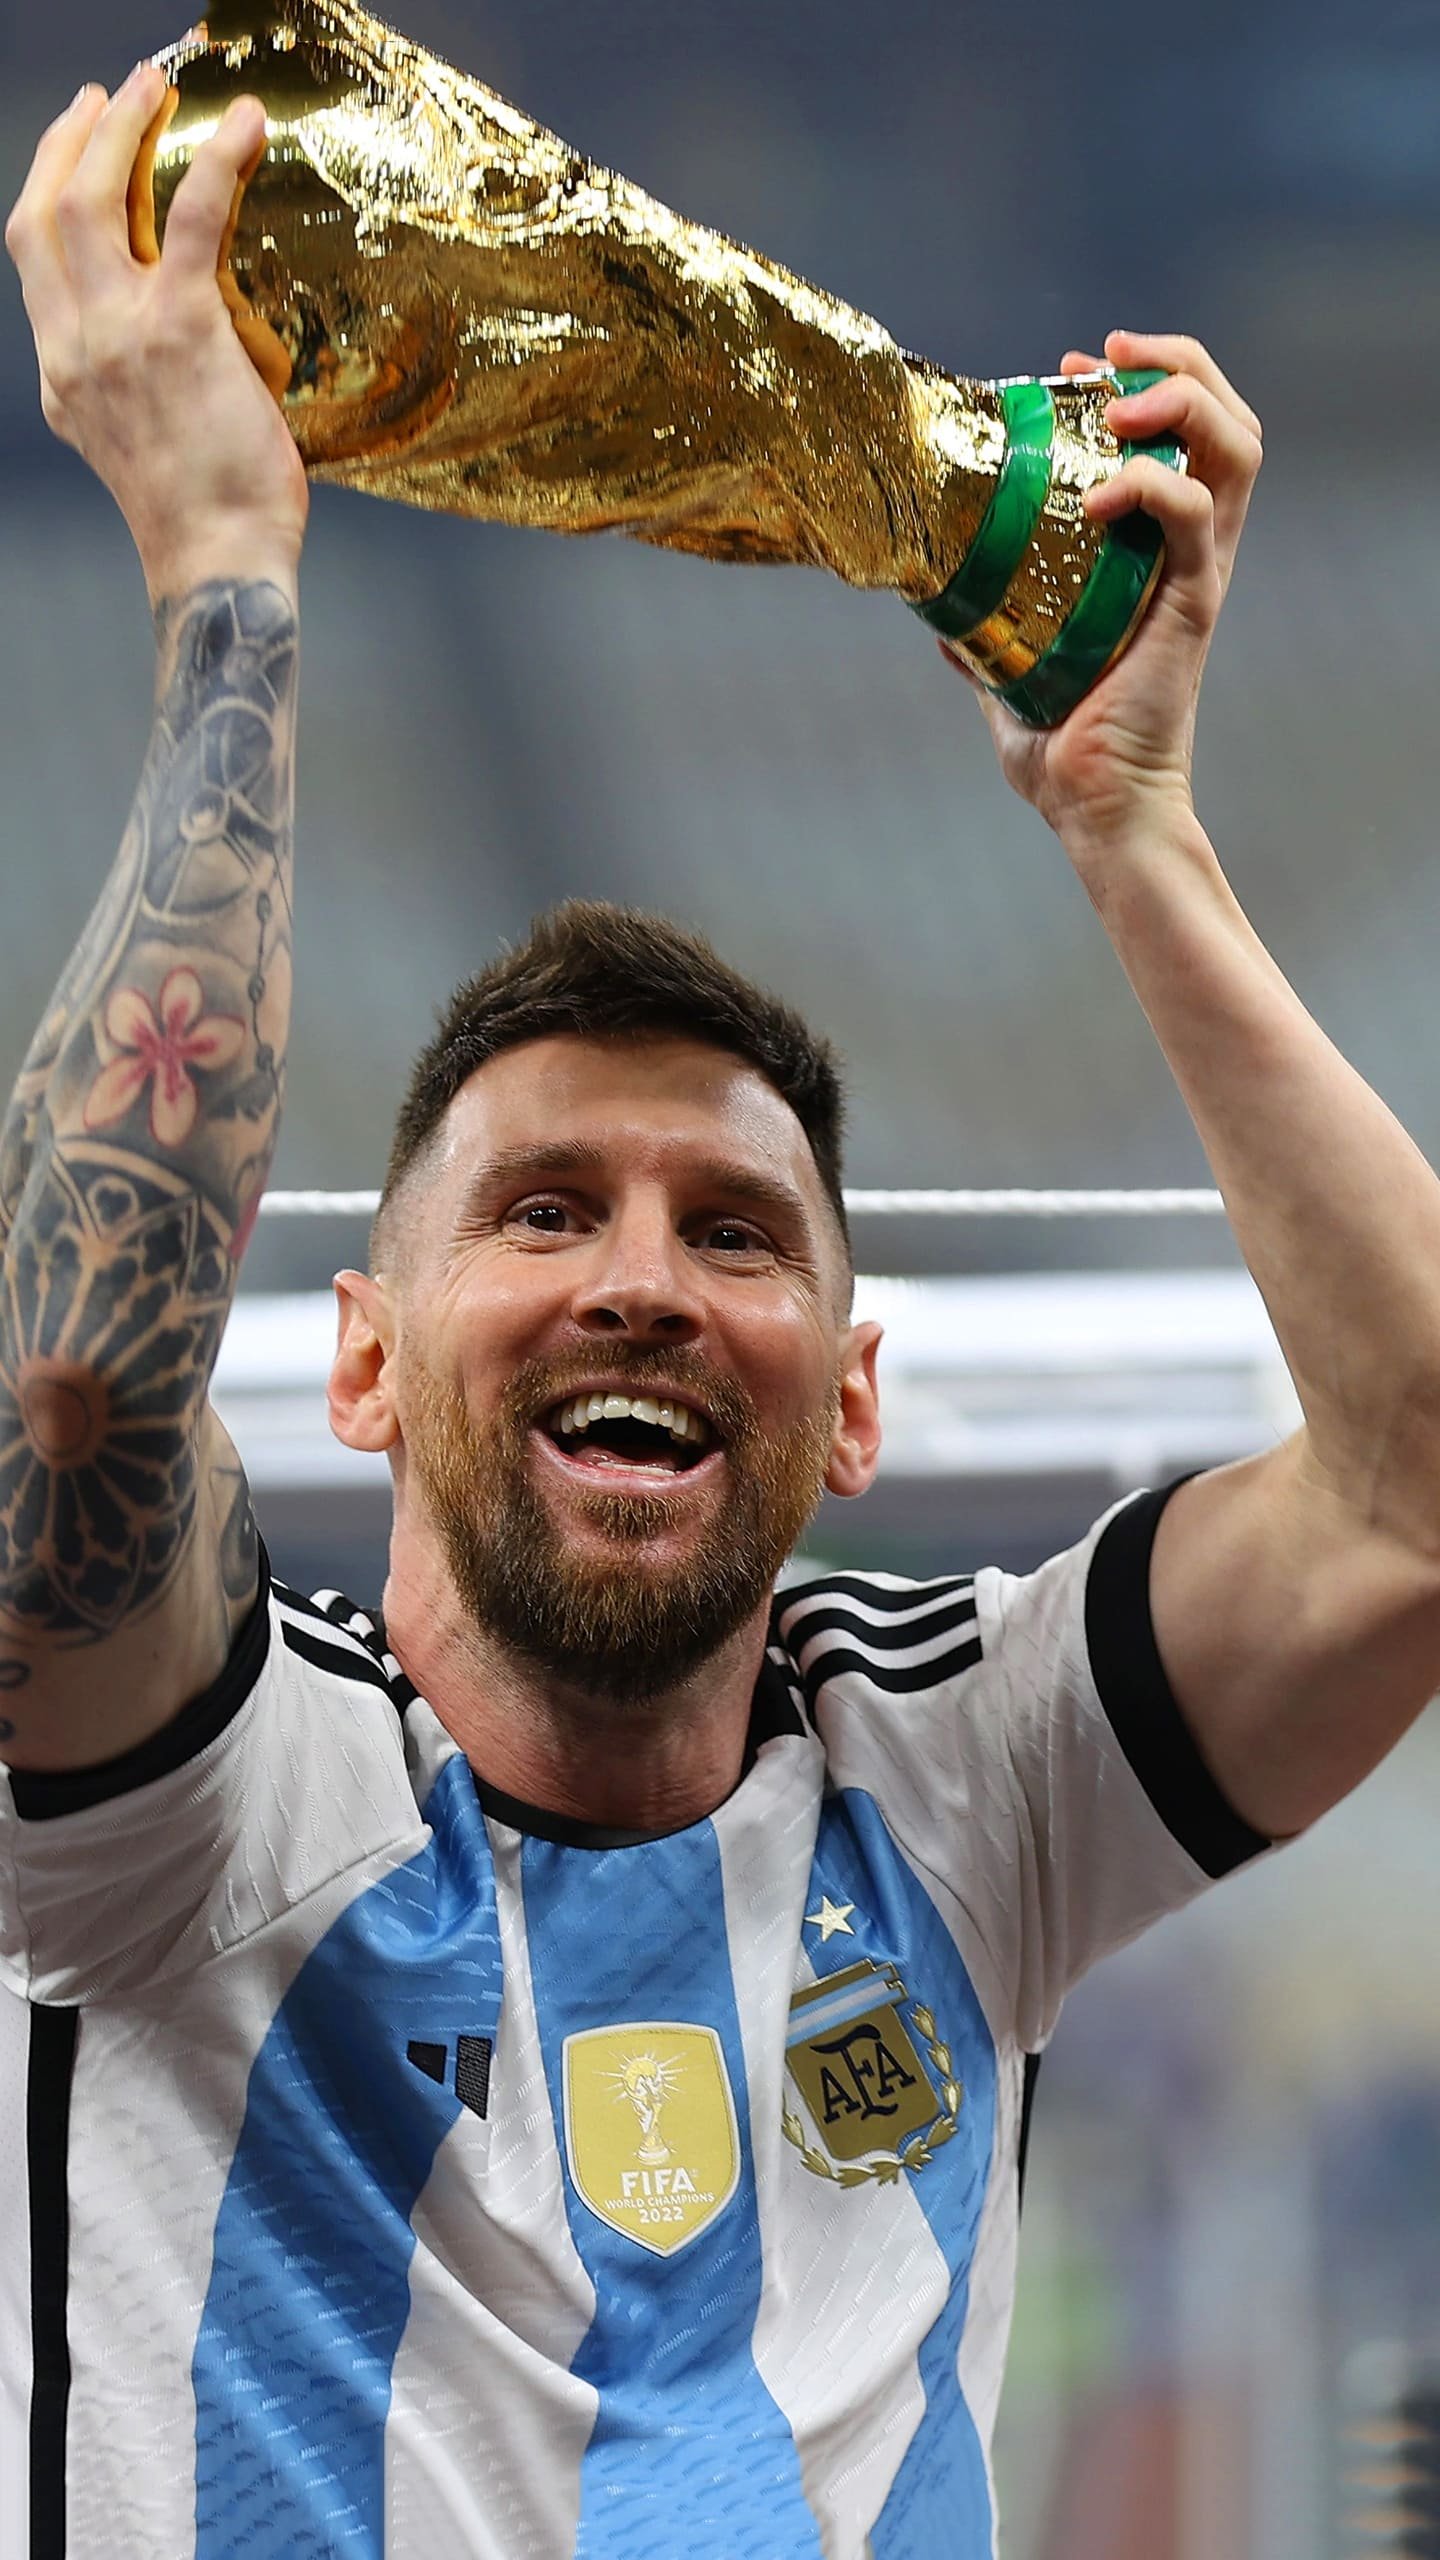 Finally Lionel Messi lifts World Cup trophy Emotions tears joy for  Argentina captains crowning achievement in potentially his last FIFA  tournament  Sporting News Canada